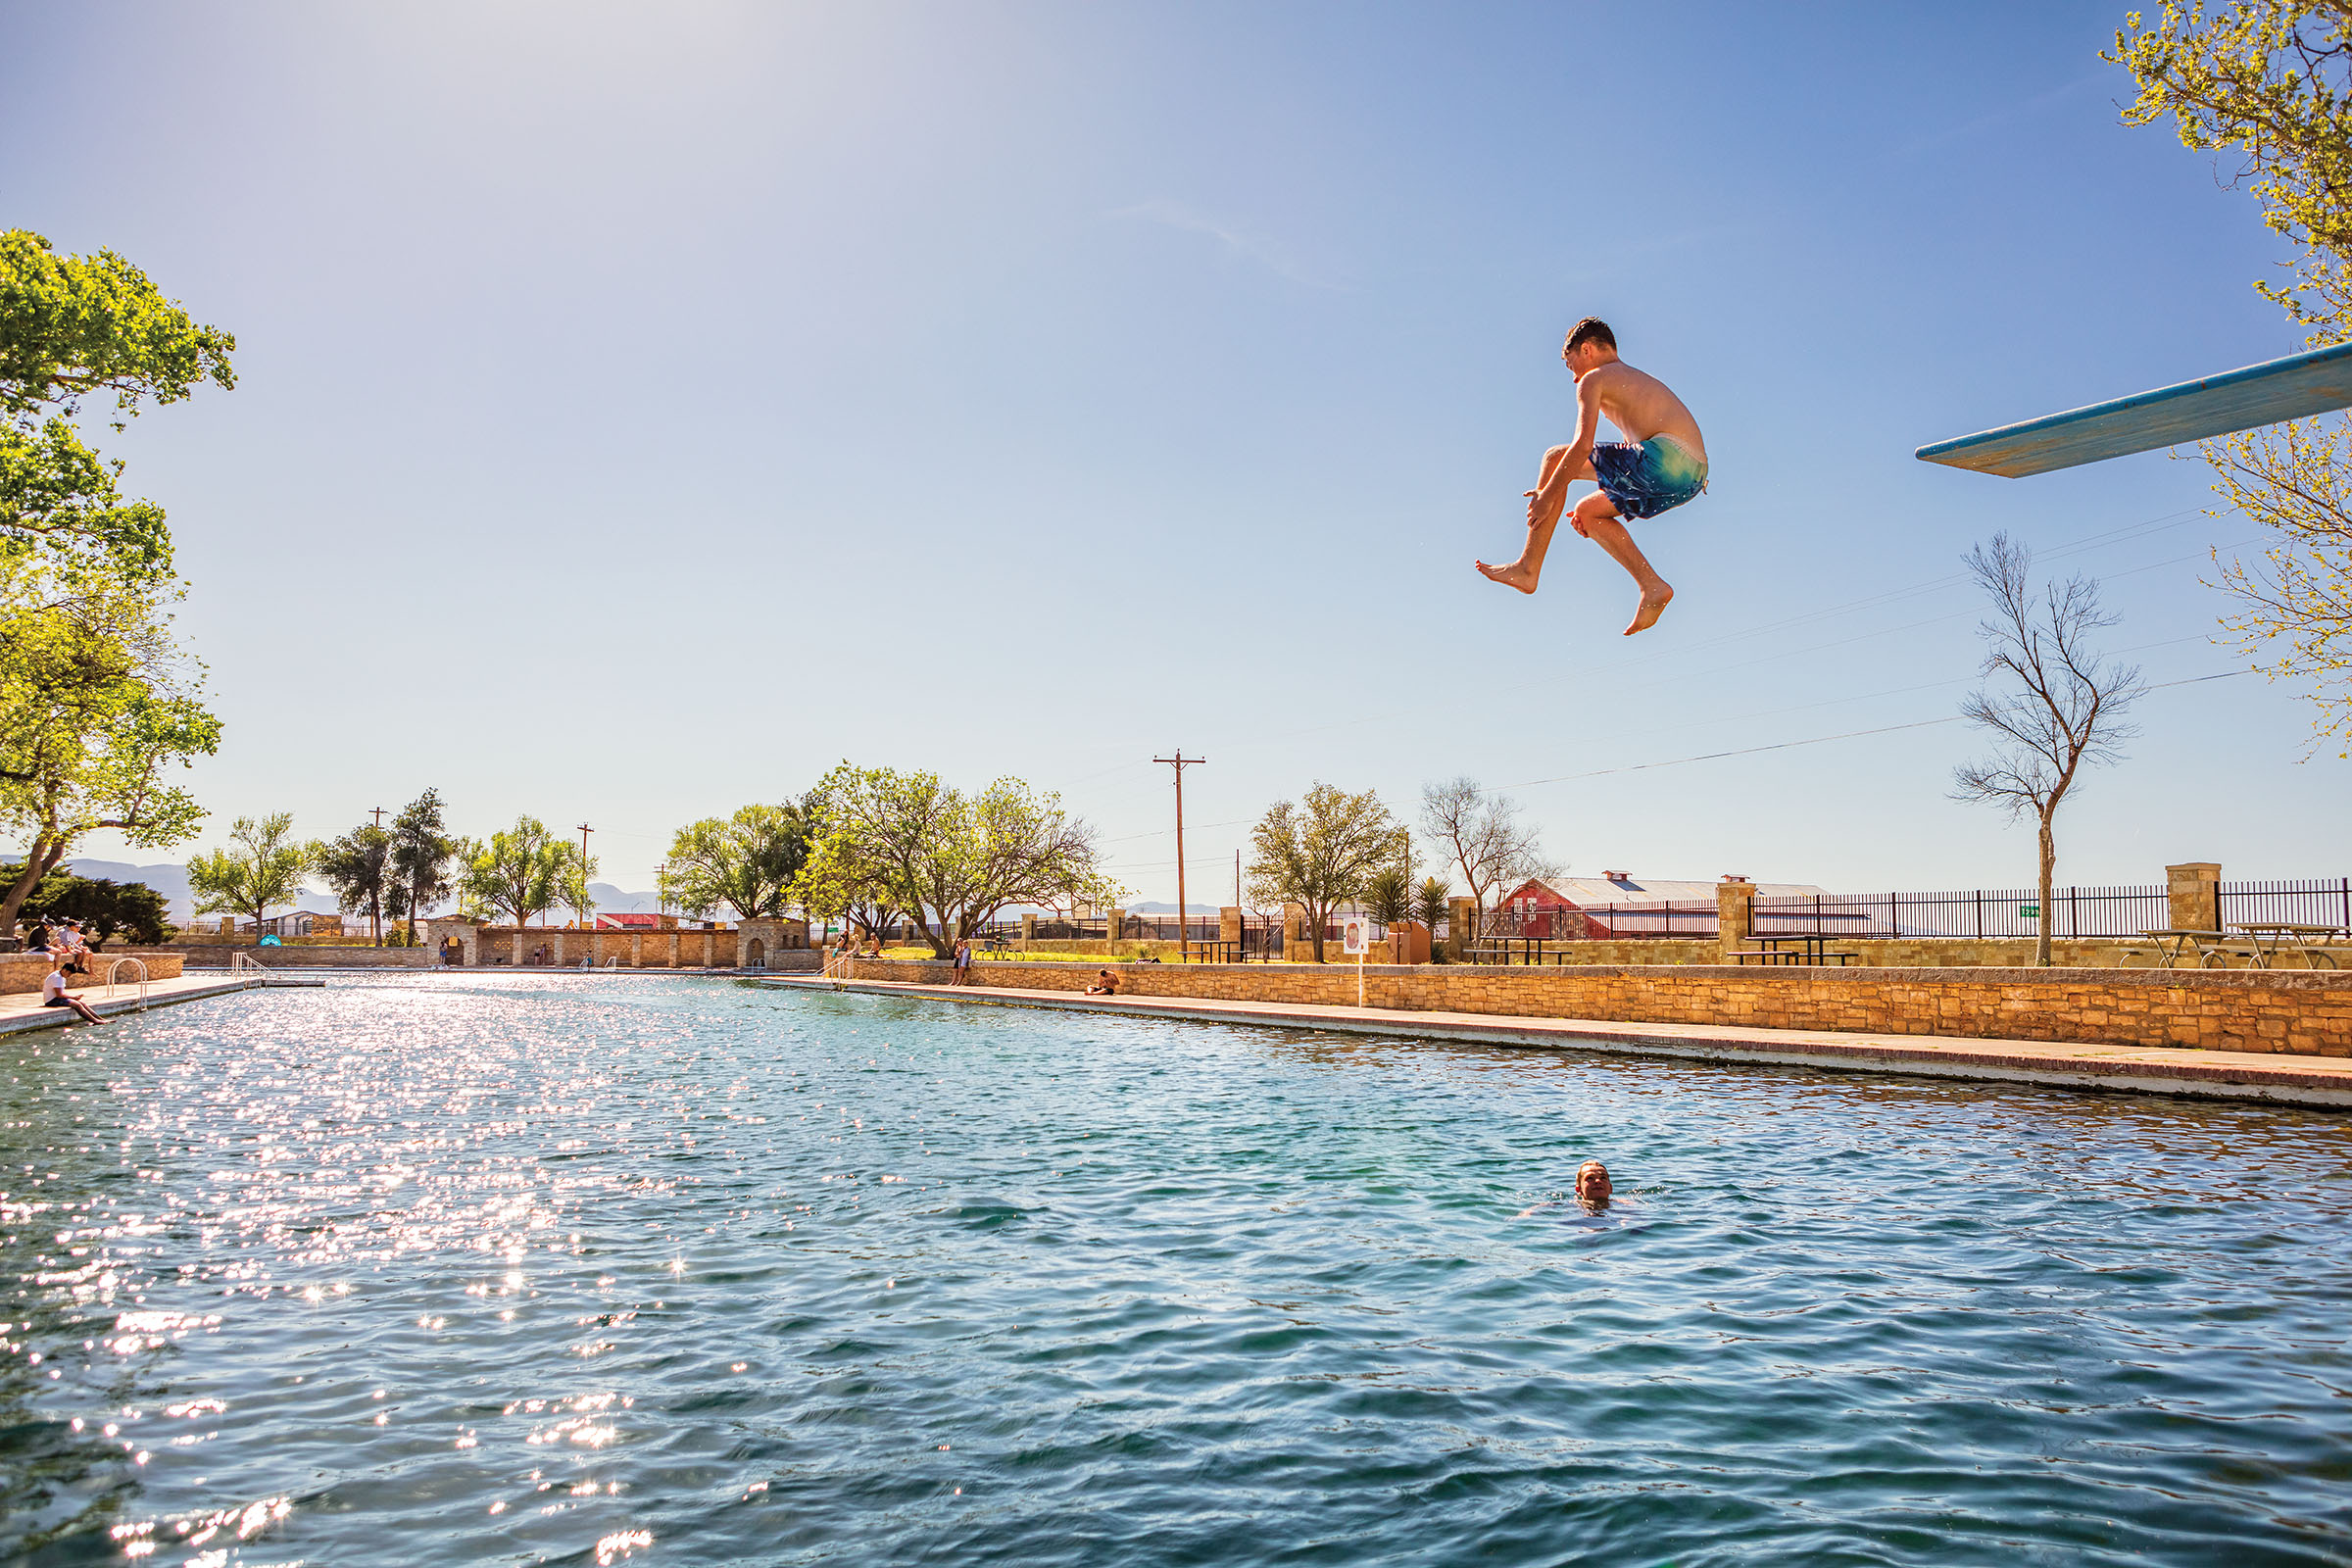 A person jumps off of a diving board into a glittering pool under blue sky